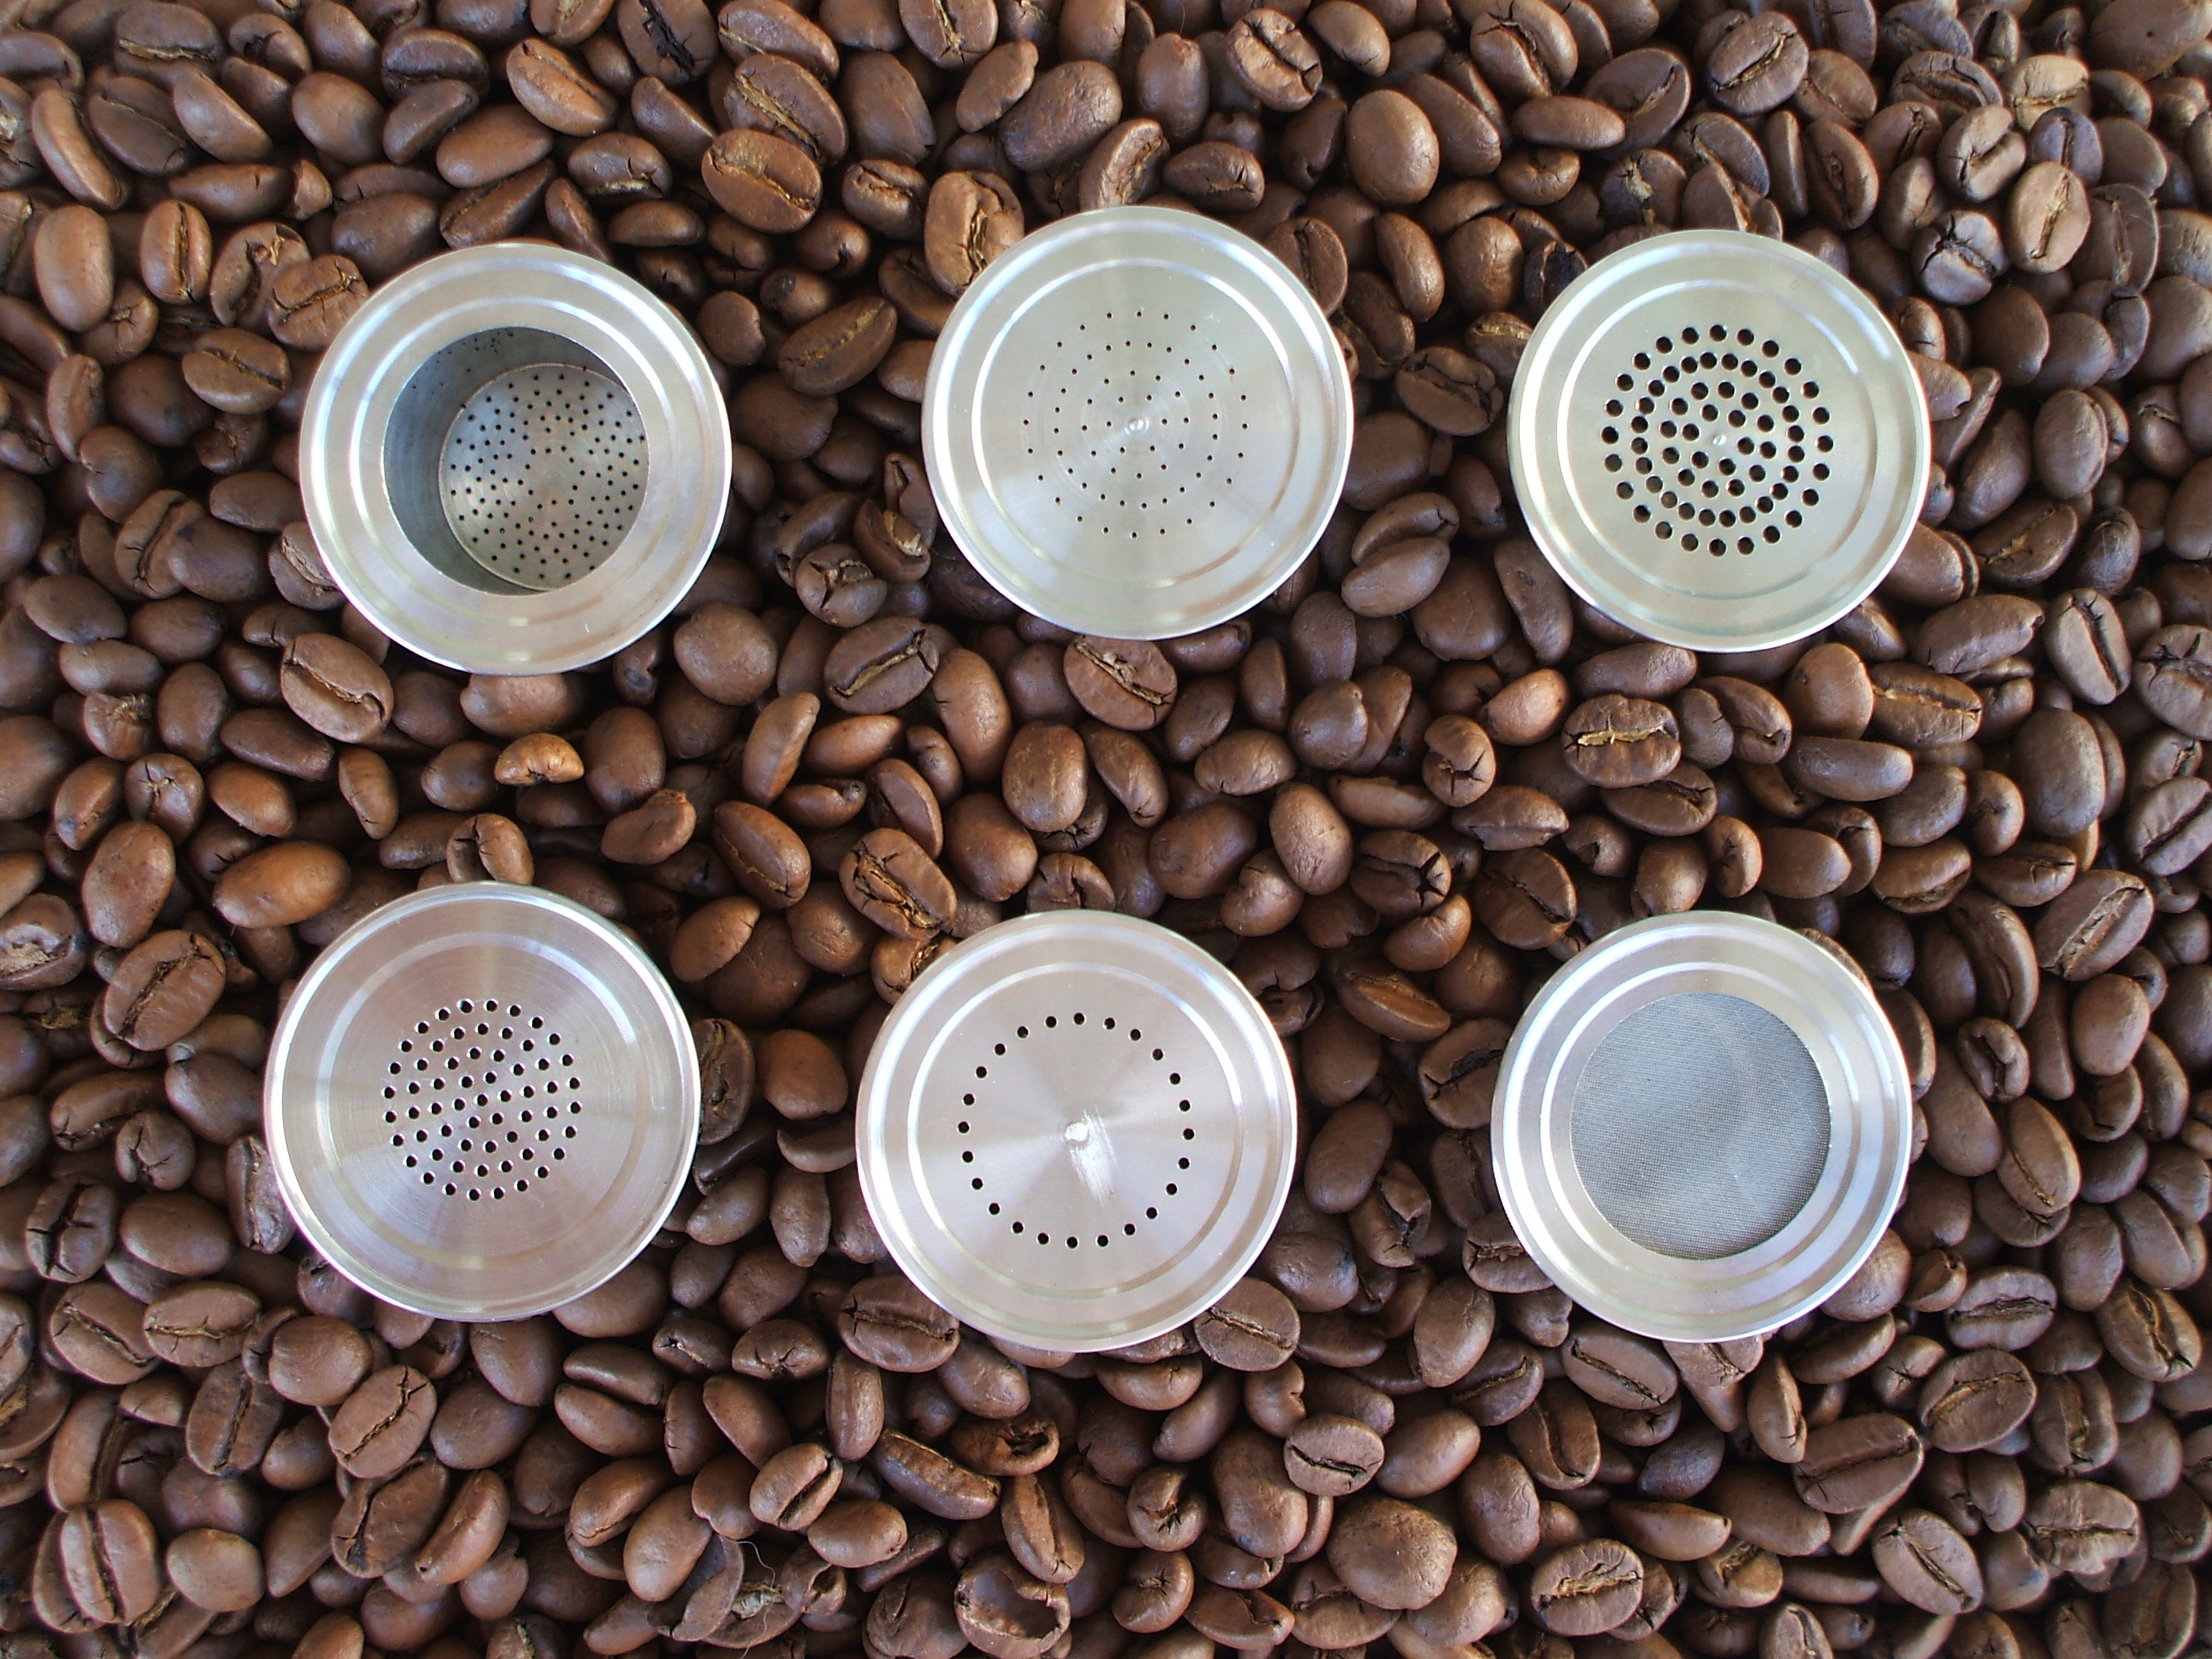 Stainless Steel Refillable Lid Trials for Nesspresso Pods